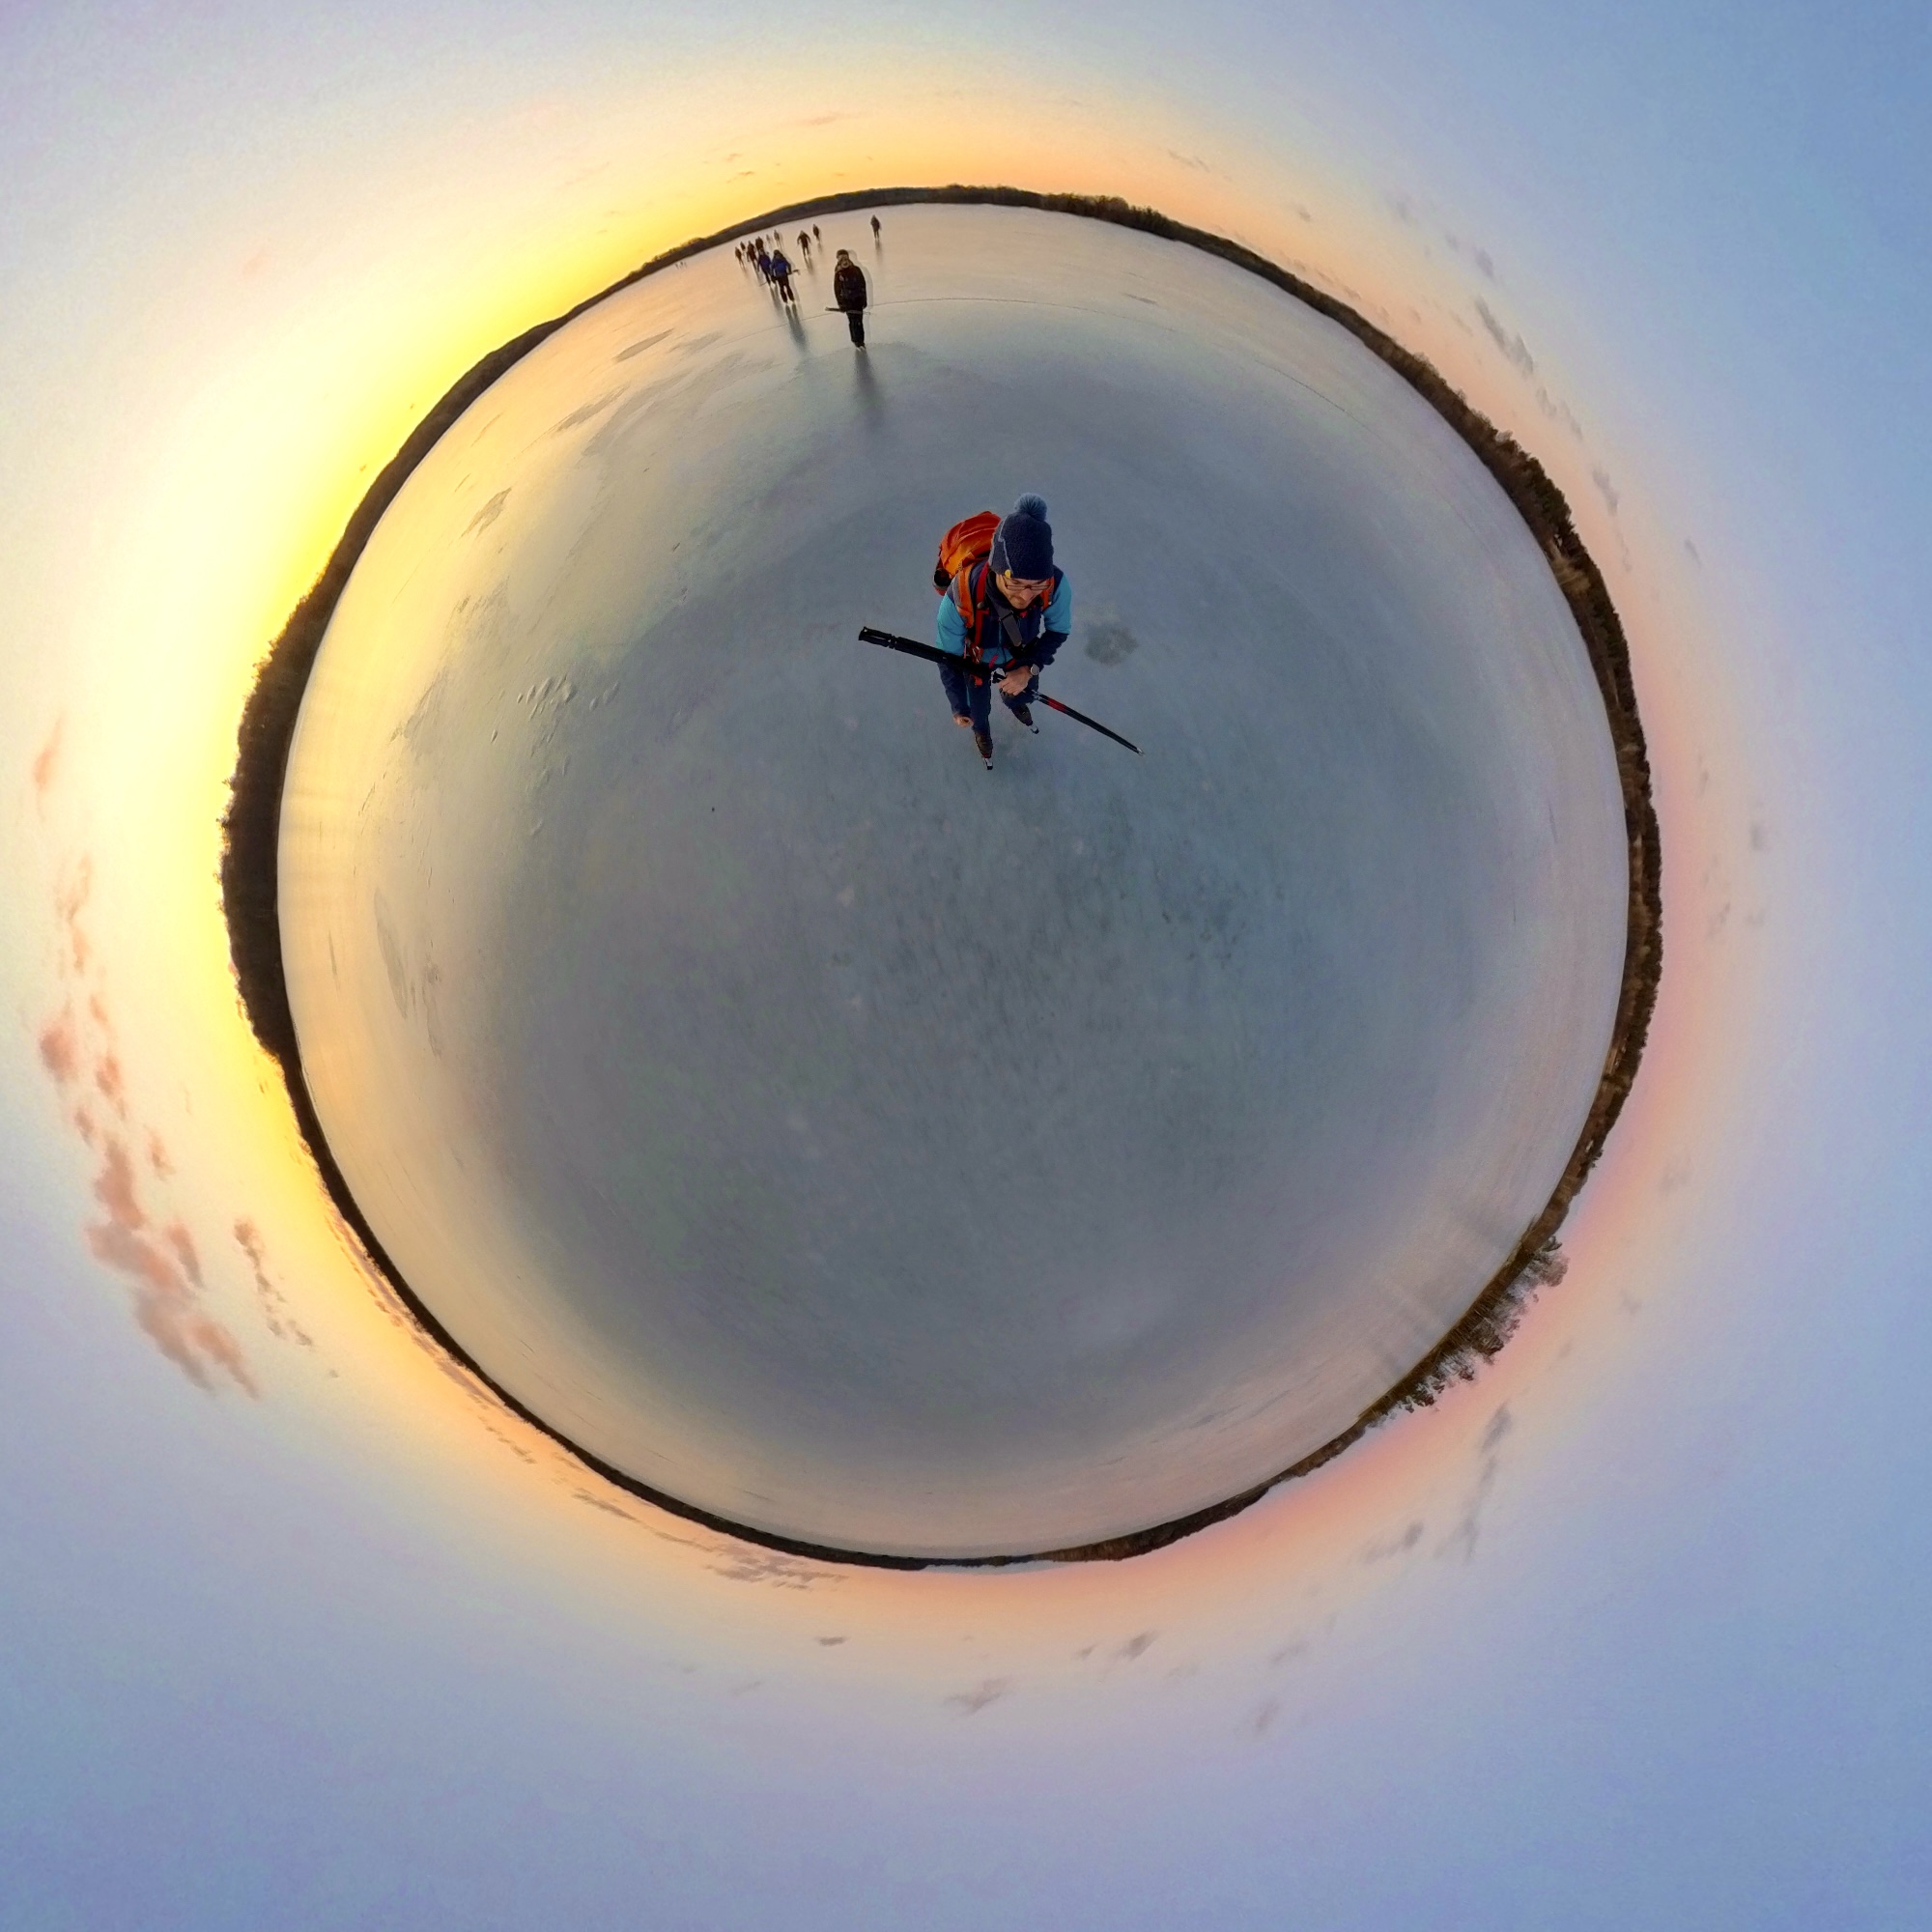 360 picture of a skater on endless lake during sunset